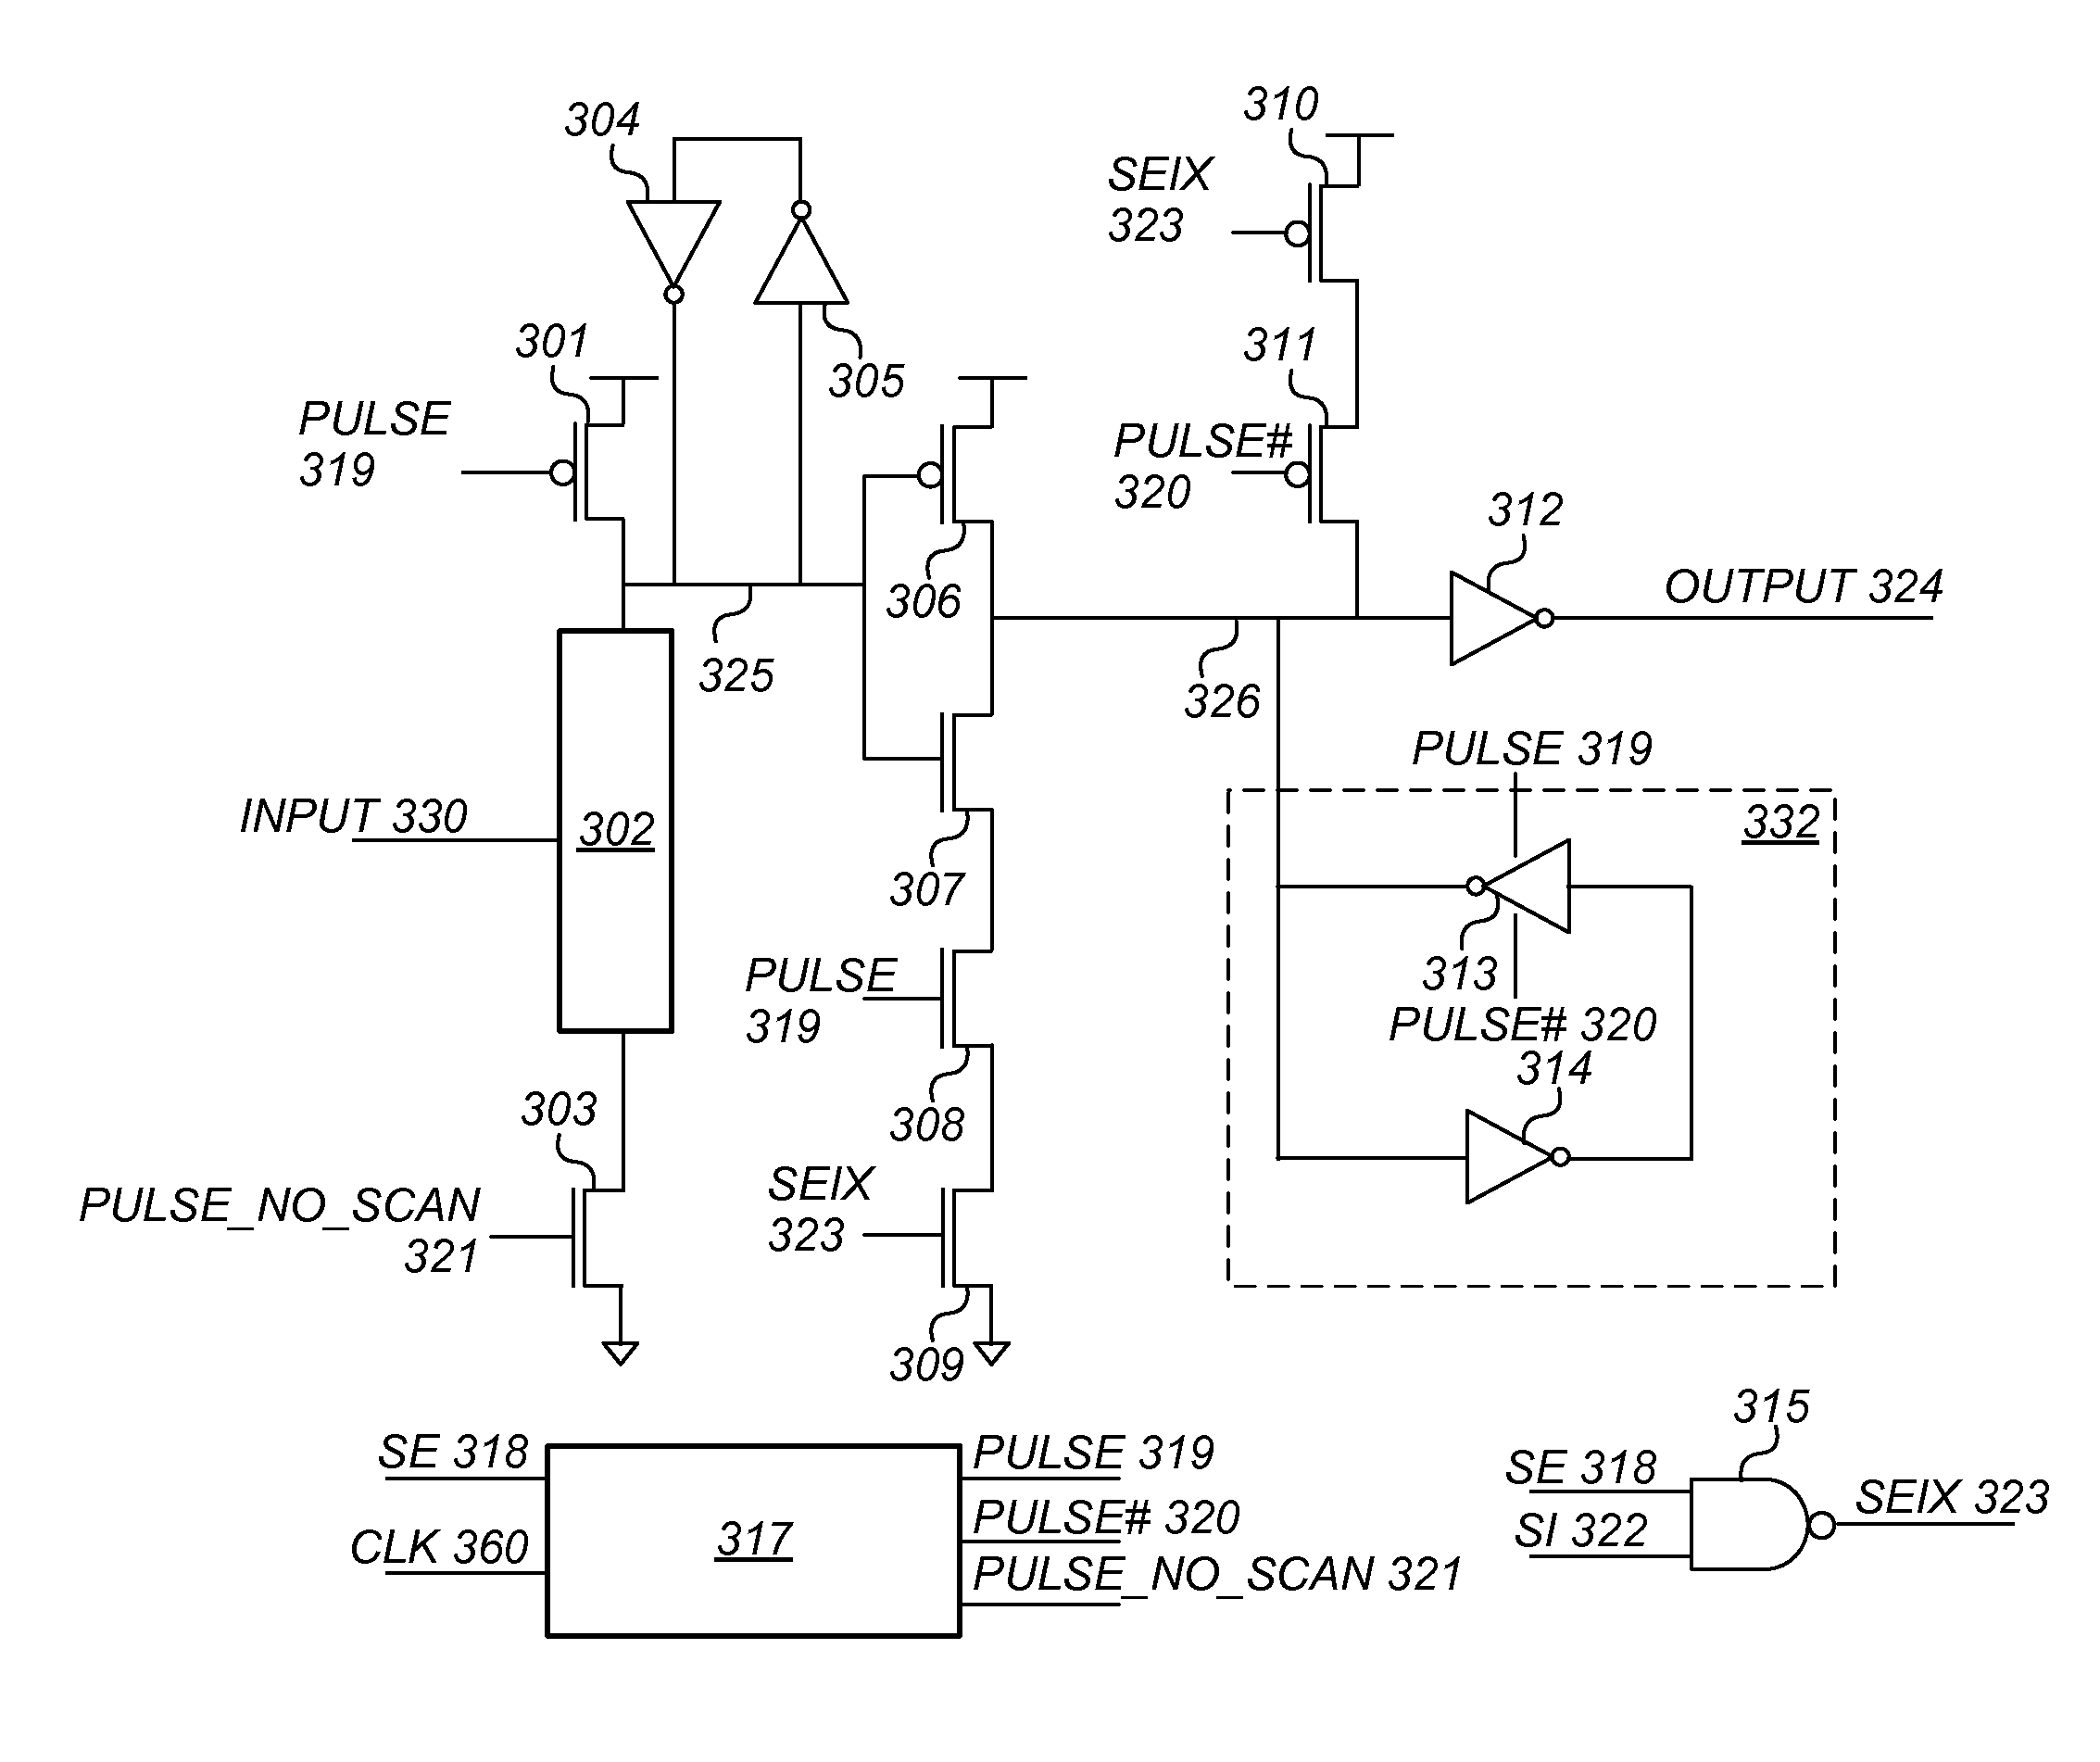 Pulse dynamic logic gates with lssd scan functionality